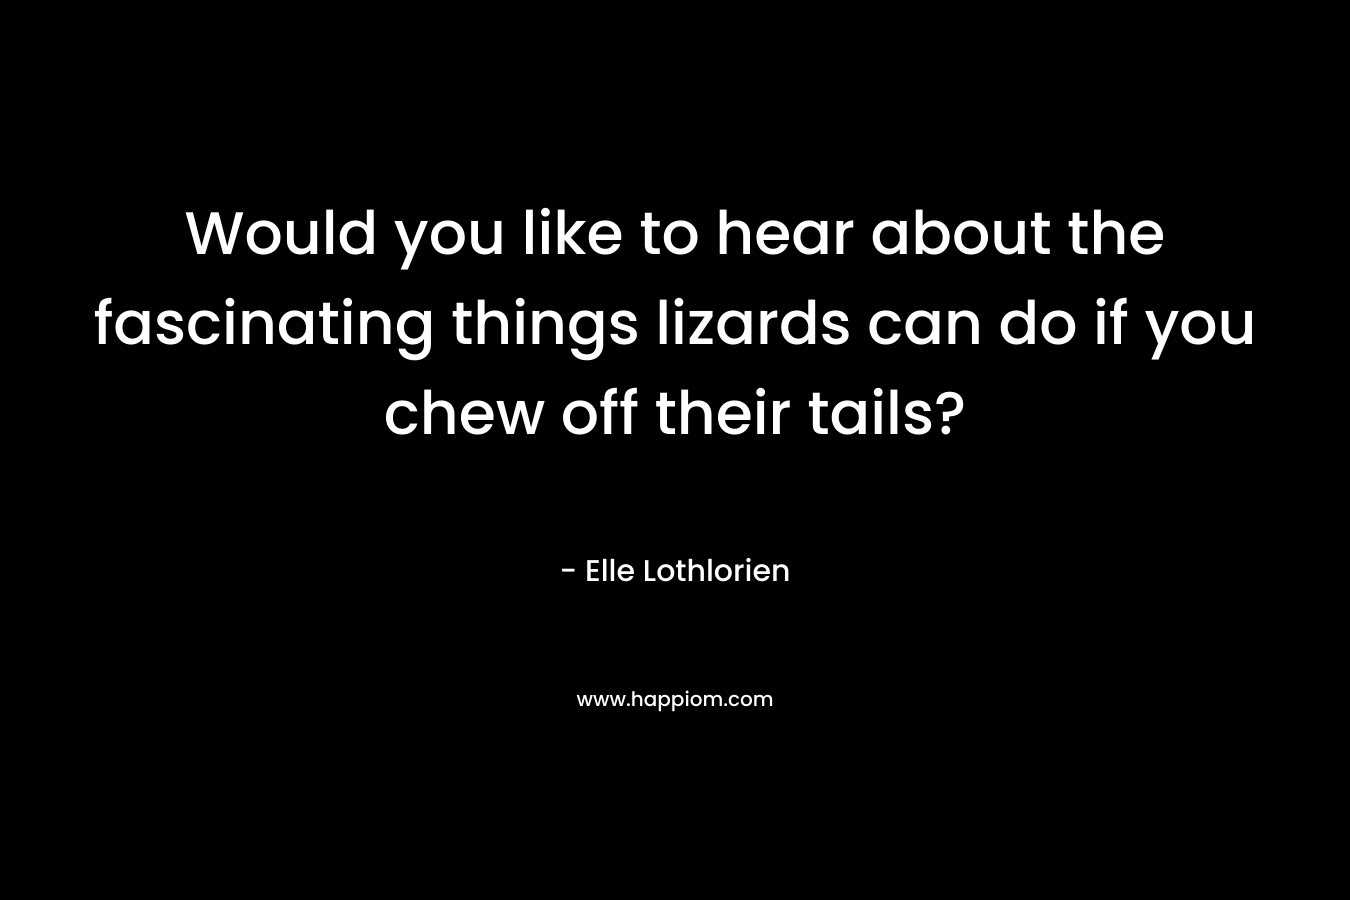 Would you like to hear about the fascinating things lizards can do if you chew off their tails? – Elle Lothlorien